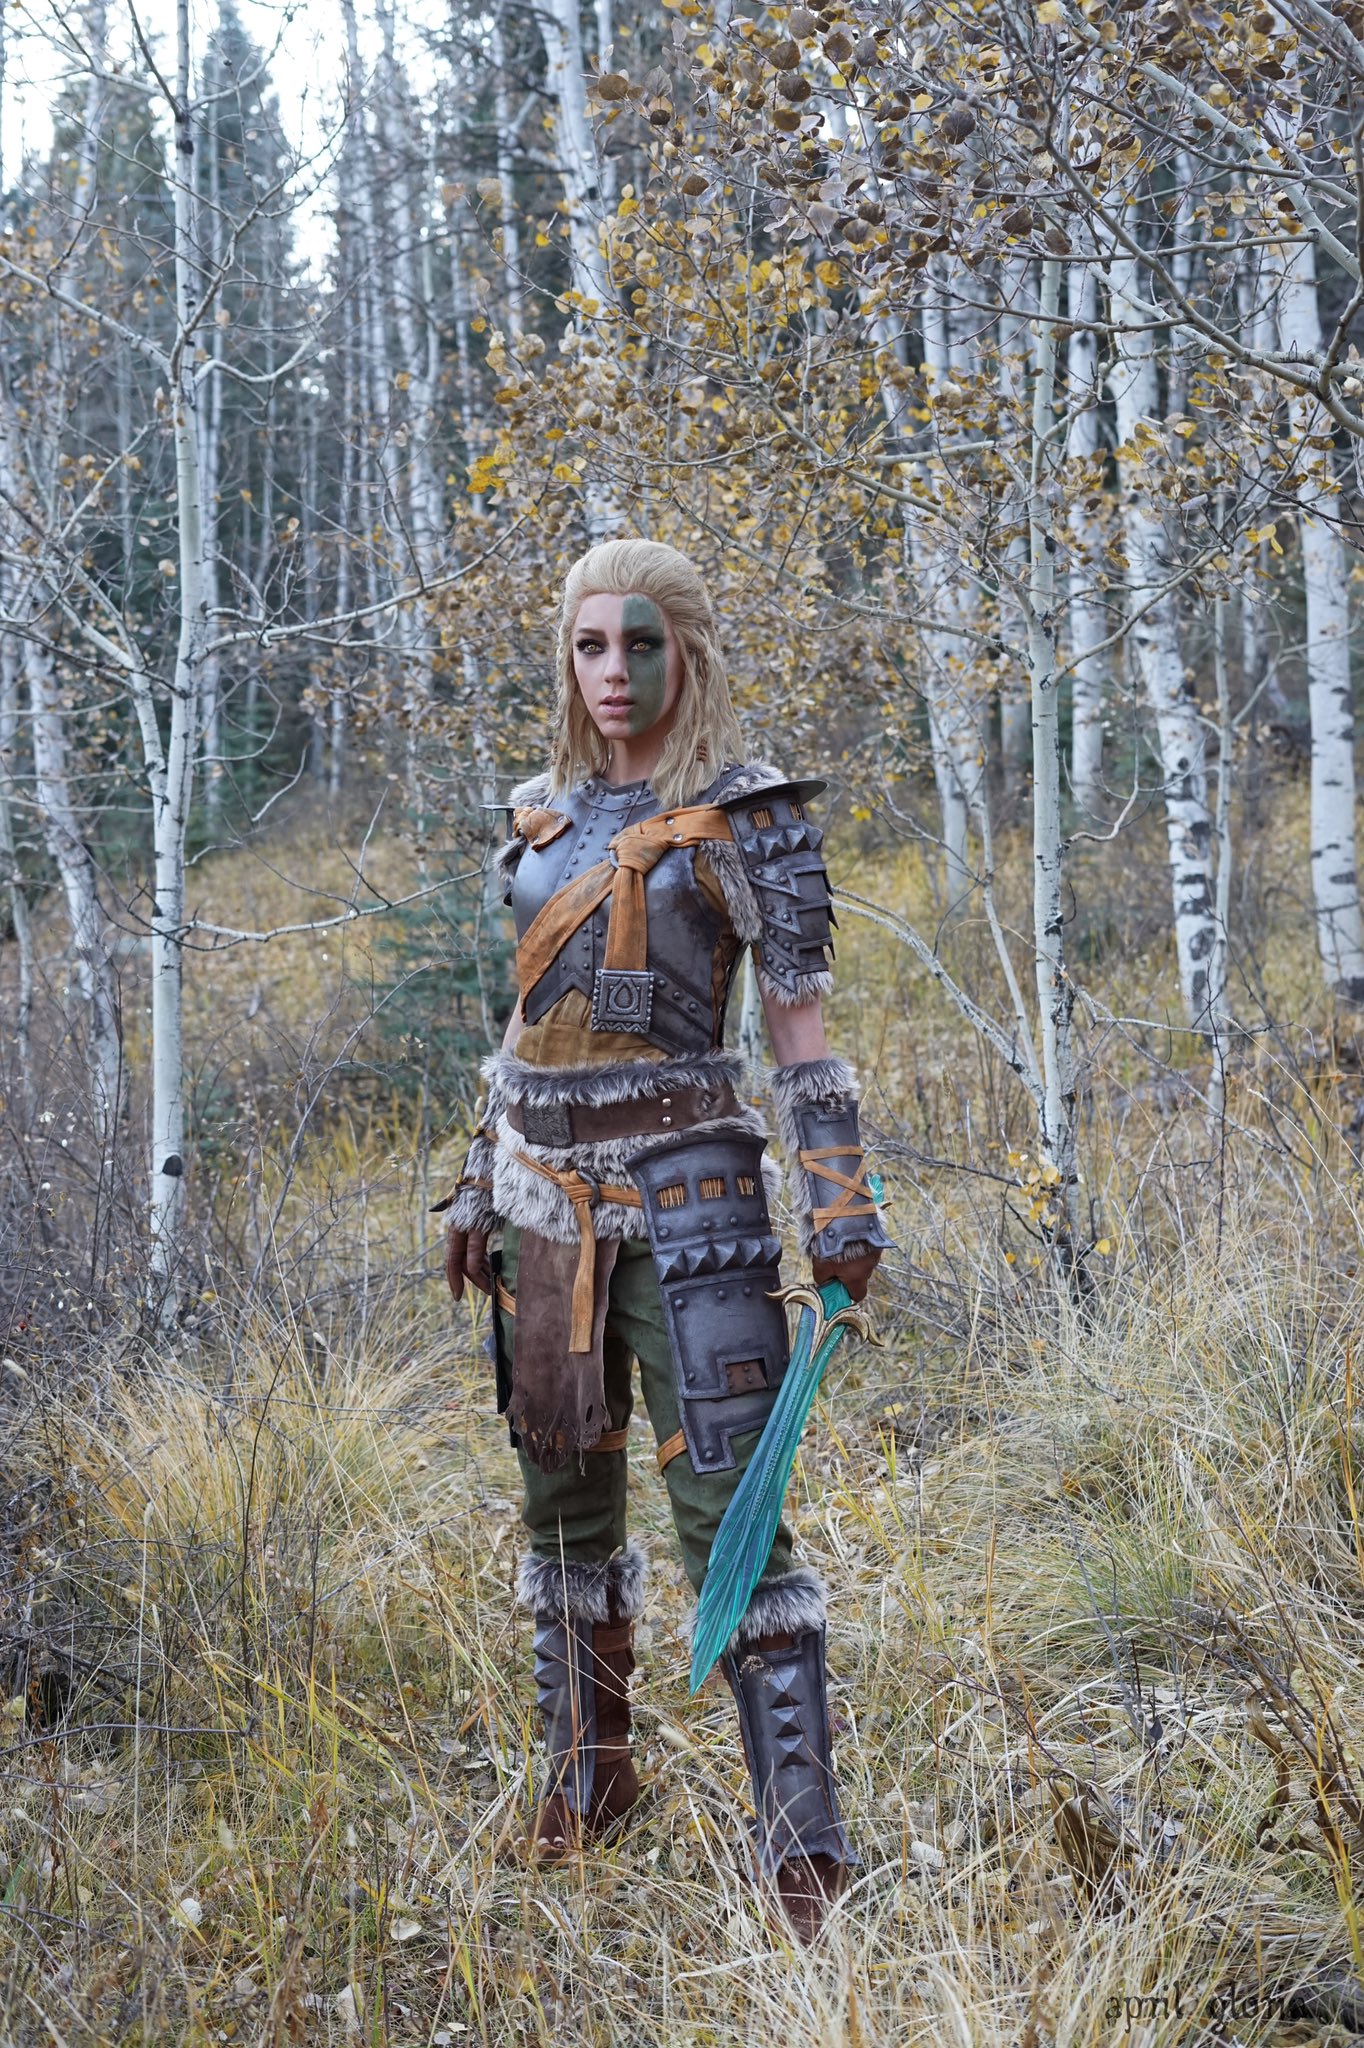 The Elder Scrolls on Twitter: "Impressive cosplay and the perfect setting!  Excellent work on Mjoll the Lioness.⚔️" / X